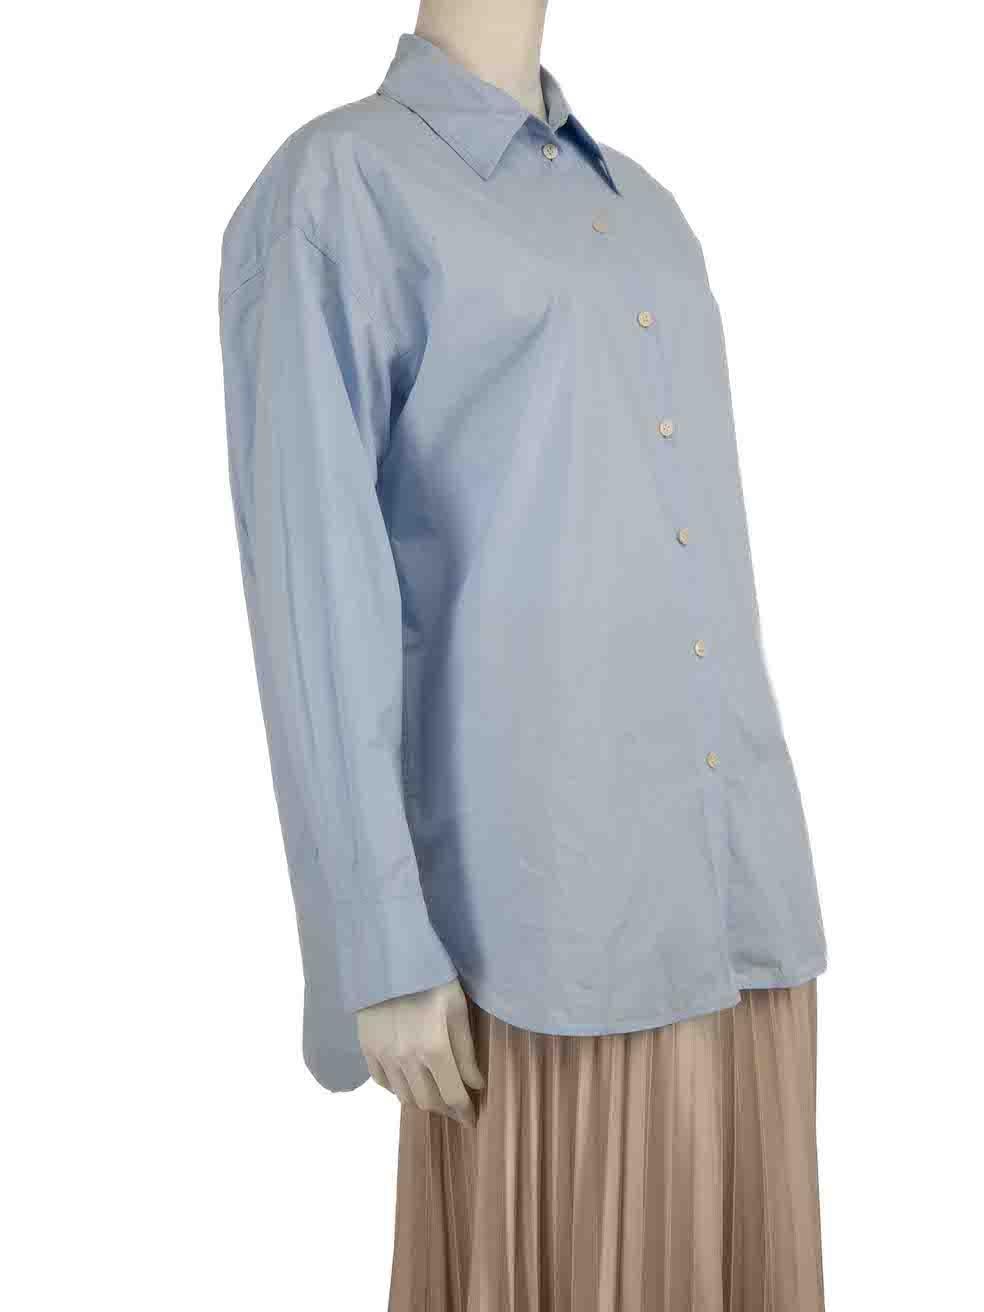 CONDITION is Very good. Hardly any visible wear to shirt is evident on this used Acne Studios designer resale item.
 
 
 
 Details
 
 
 Blue
 
 Cotton
 
 Shirt
 
 Button up fastening
 
 Long sleeves
 
 Buttoned cuffs
 
 
 
 
 
 Made in China
 
 
 
